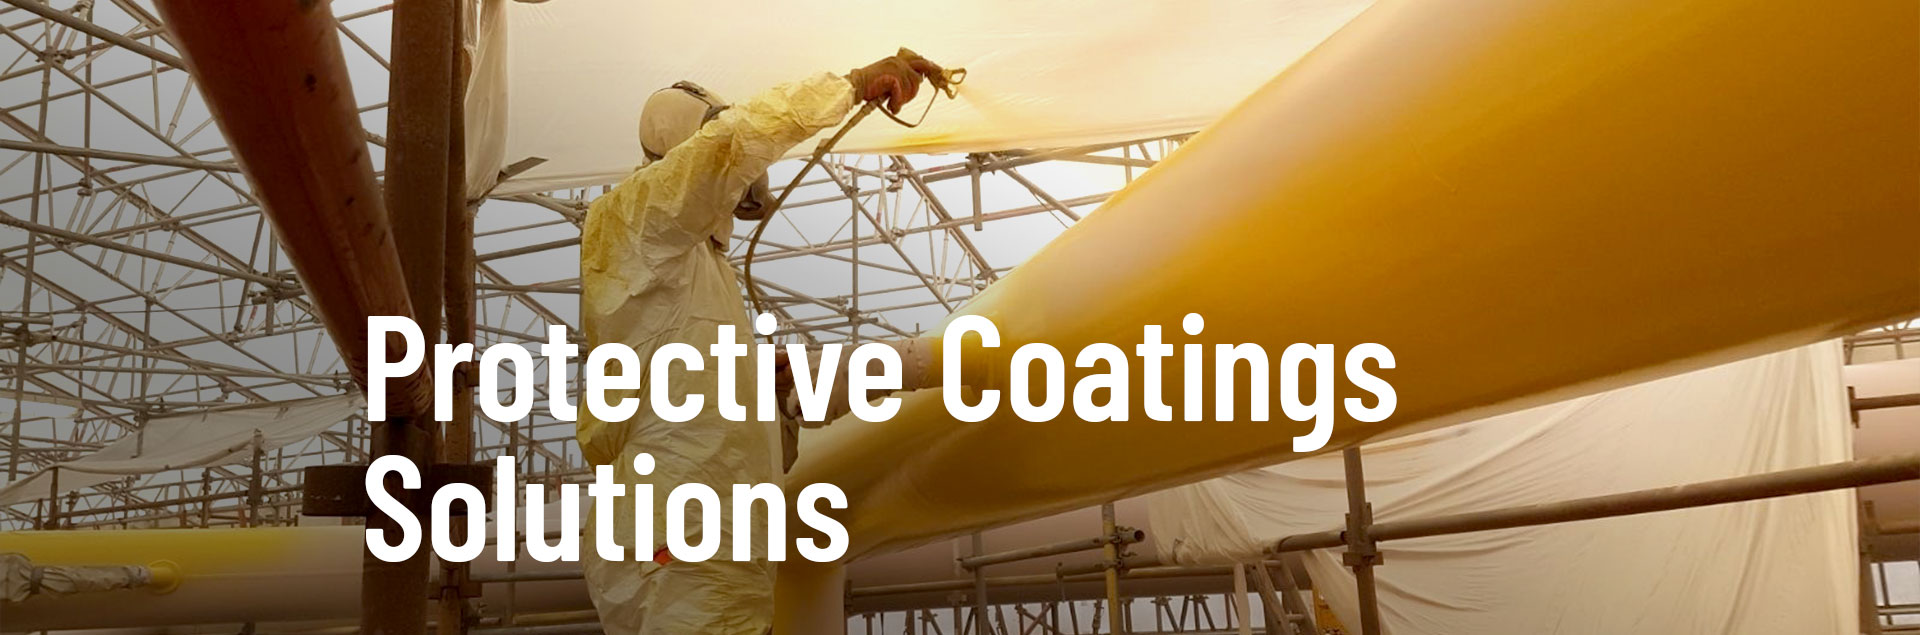 protective coating solutions